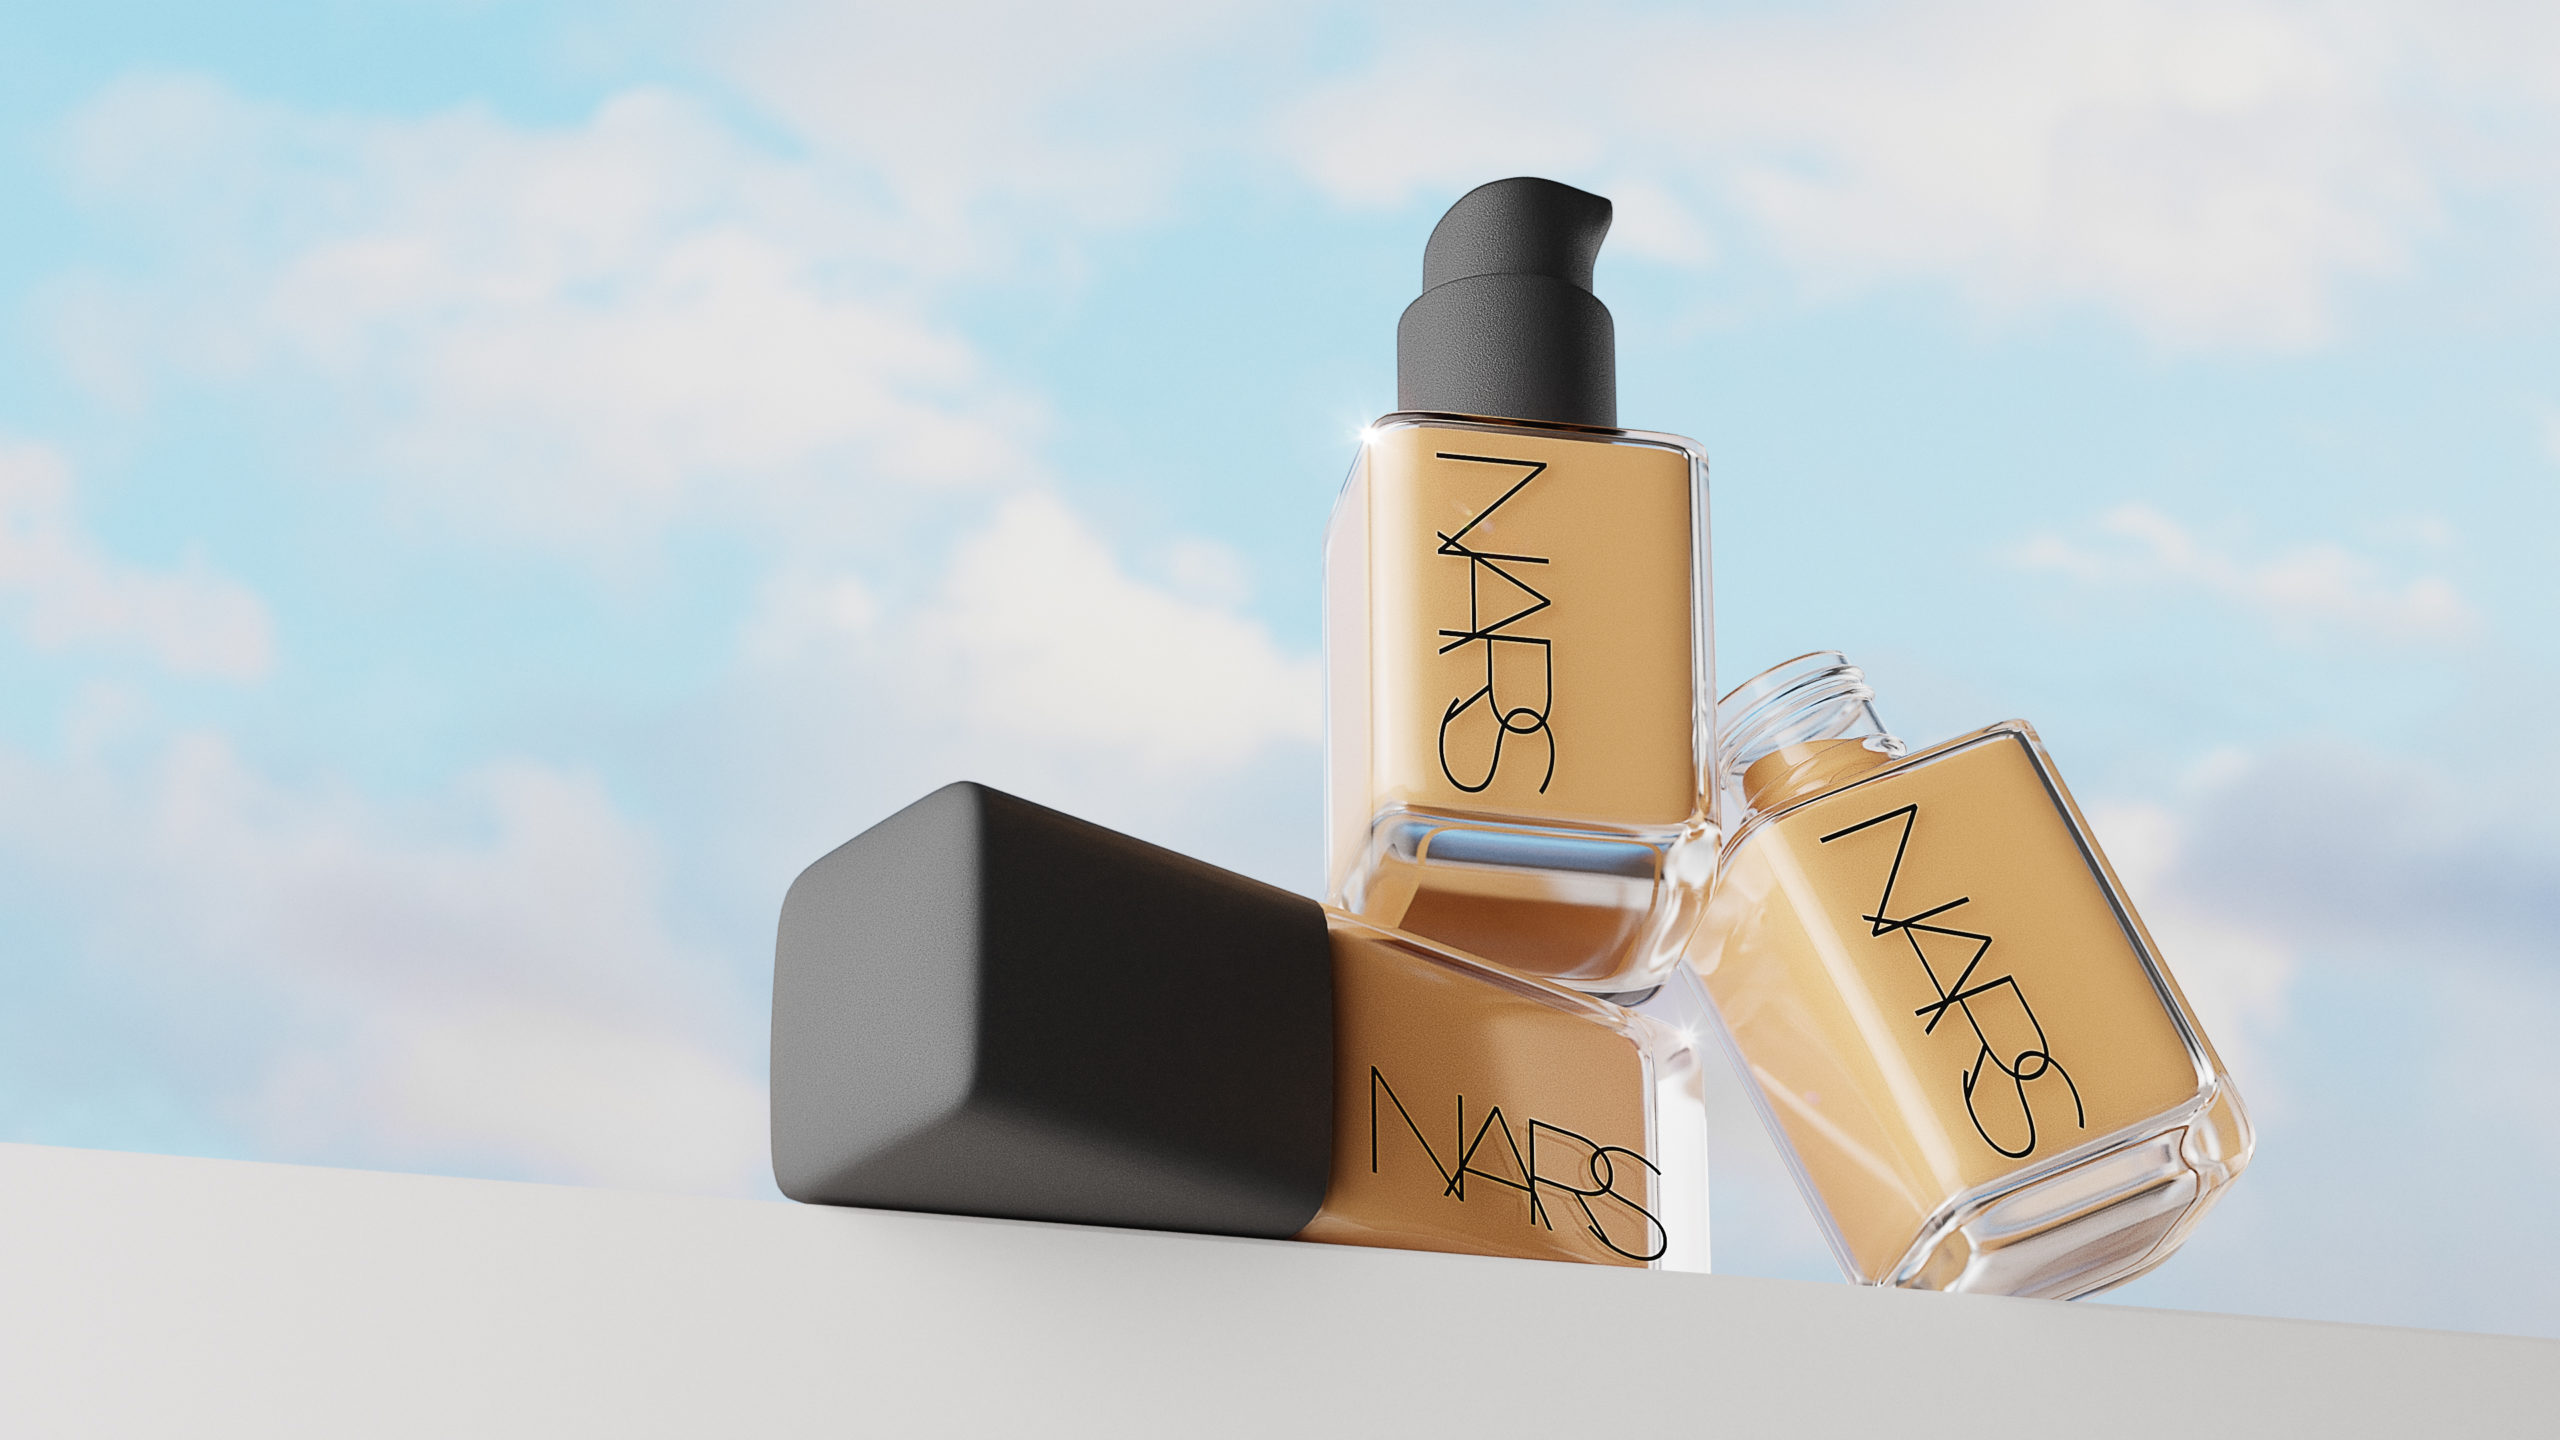 CGI-Photography-with-NARS-By-Wenbo-Zhao-Sydney with sky in the background and makeup foundations